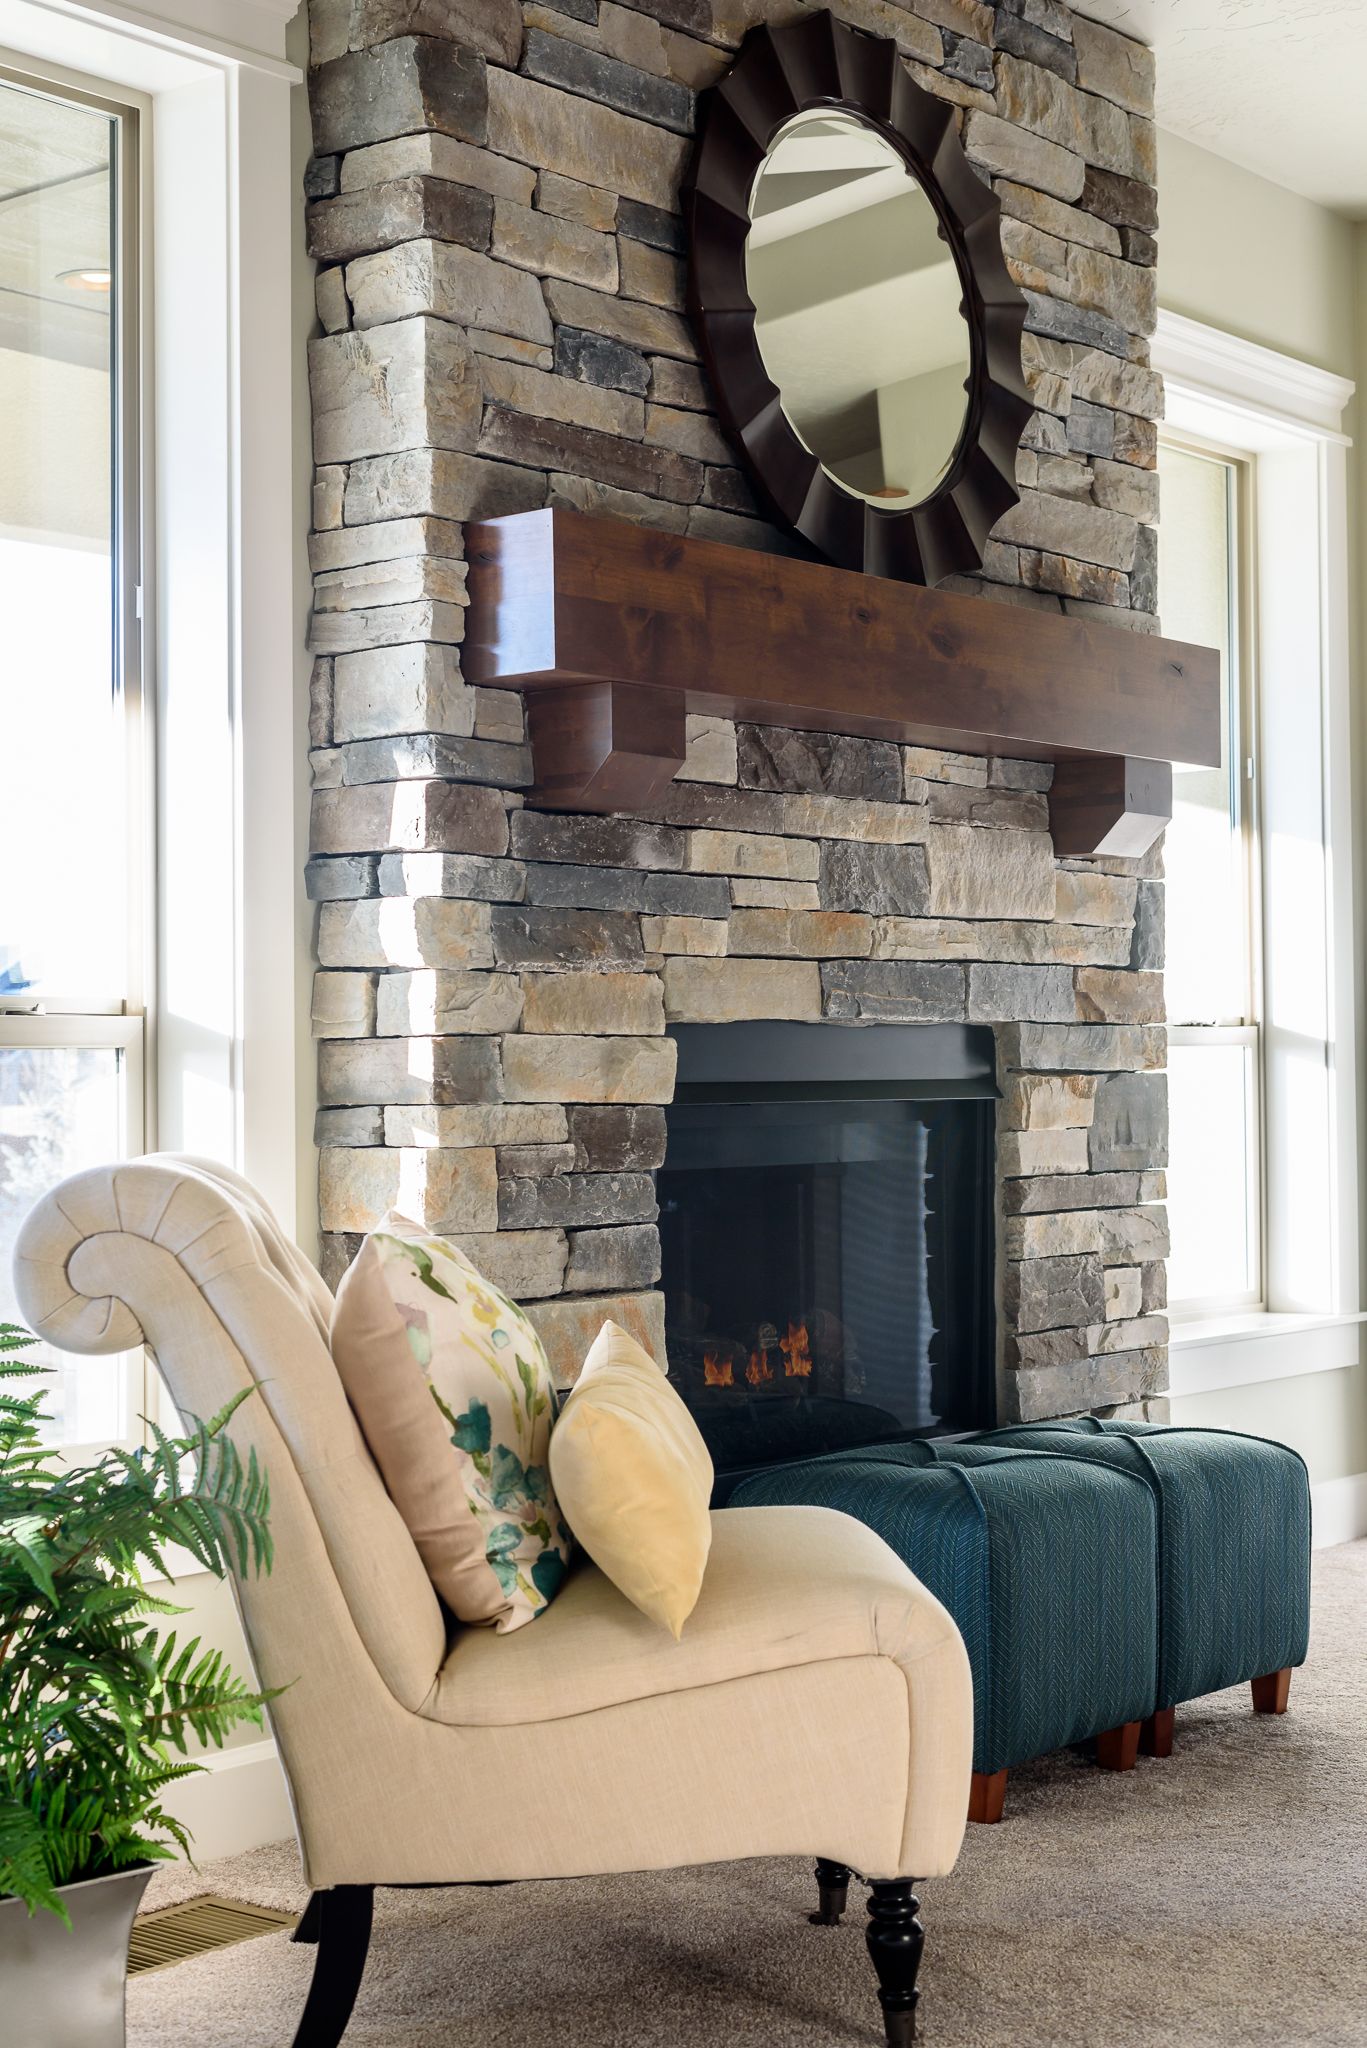 Rock Fireplace Ideas Lovely Echo Ridge Country Ledgestone On This Floor to Ceiling Stone